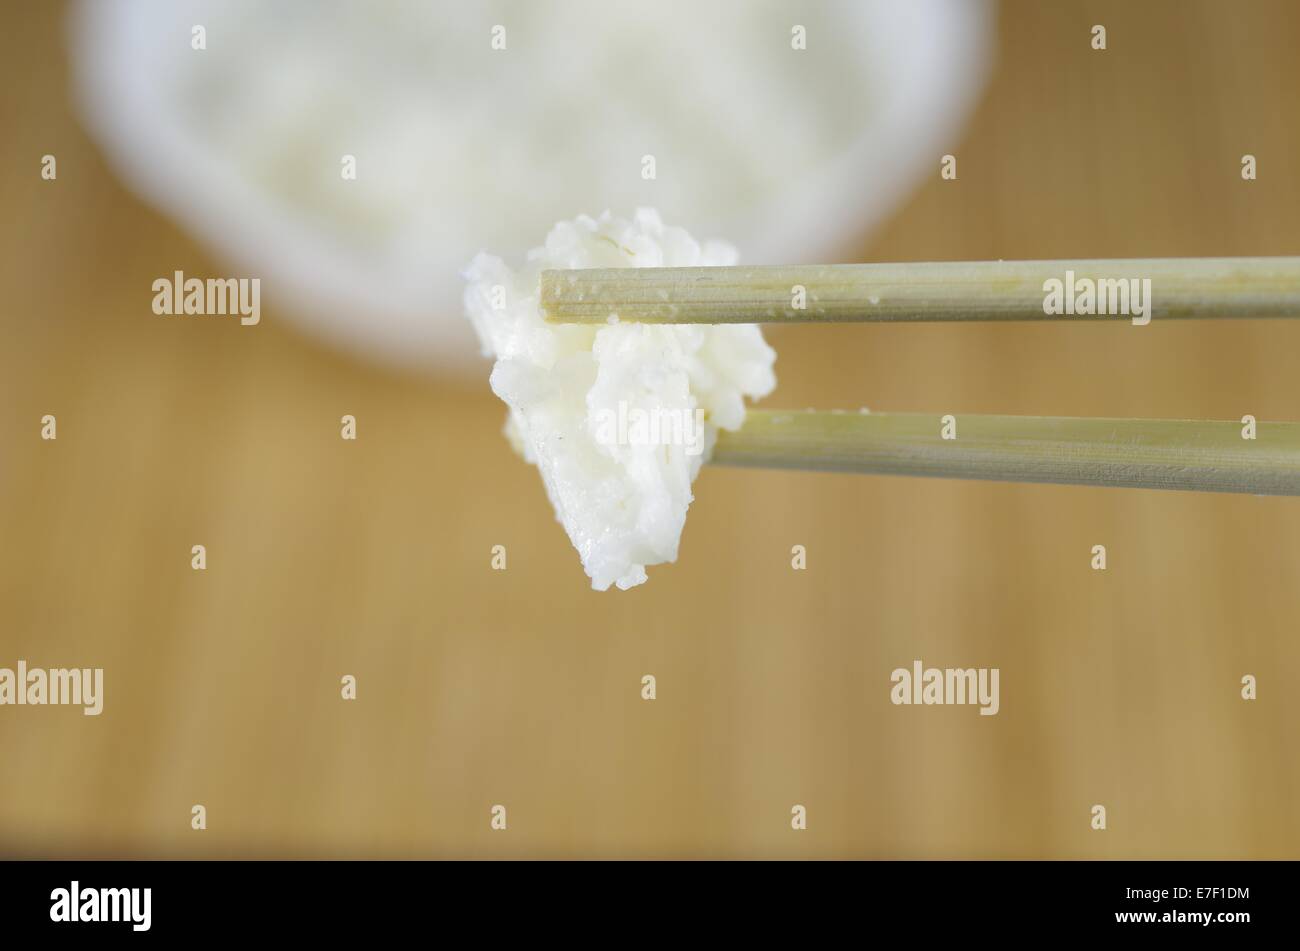 the stick and the rice on background of mat Stock Photo